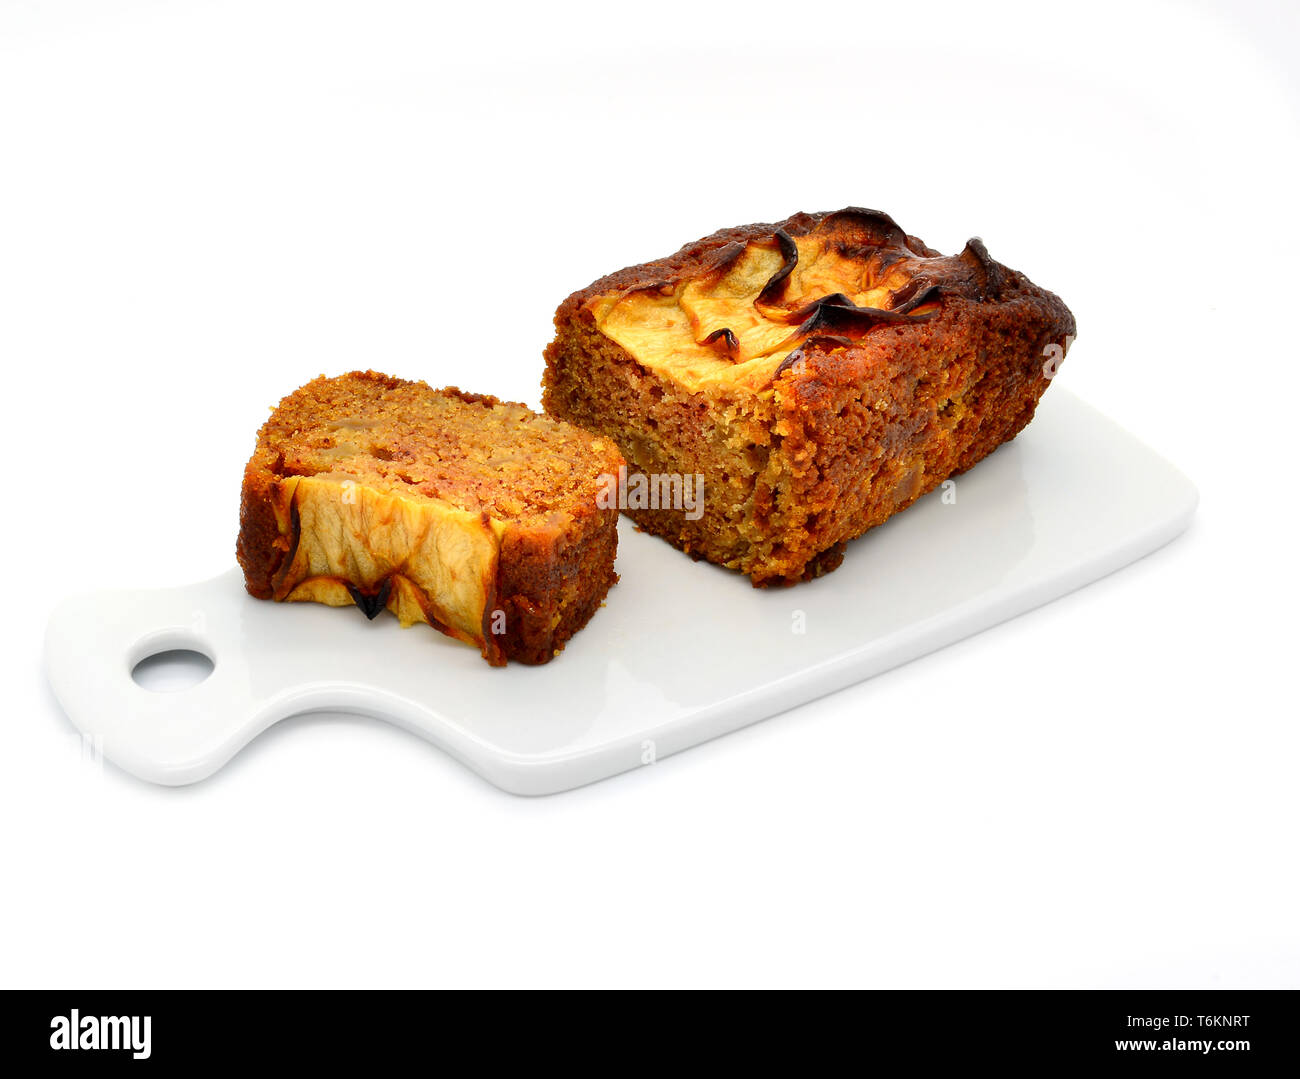 Apple pie with honey on a white background. Stock Photo